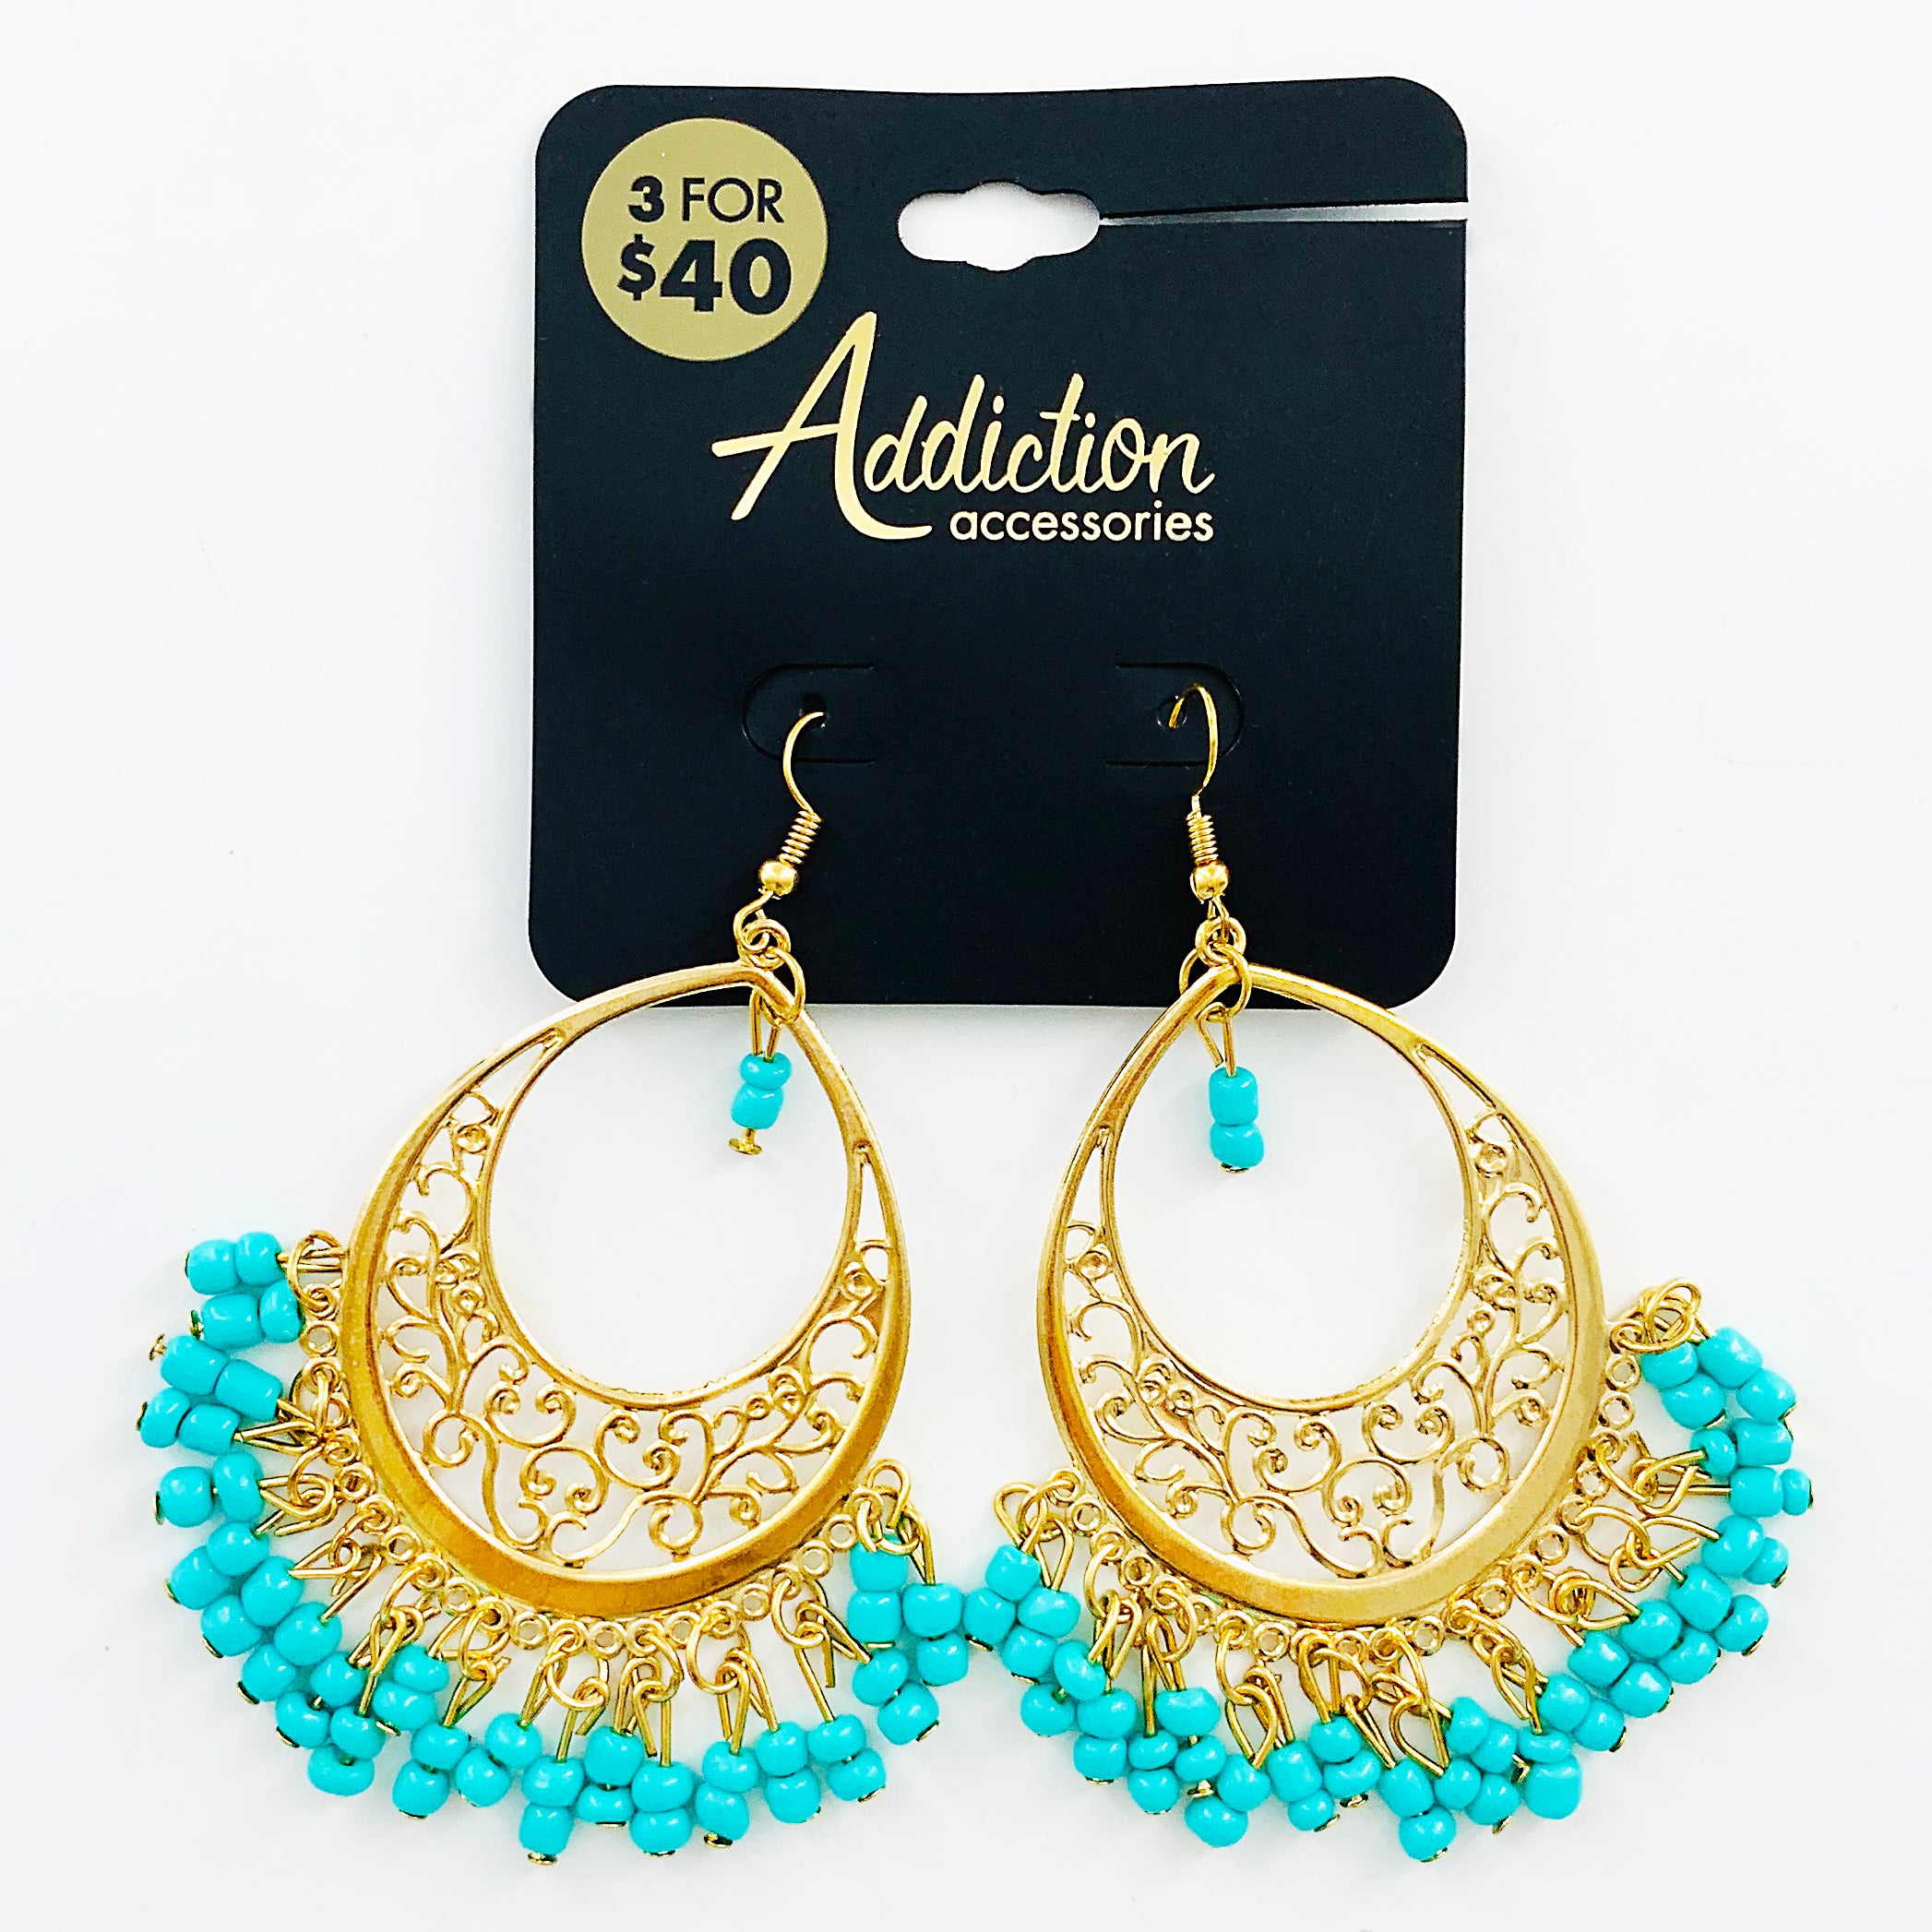 Ethnic-inspired gold earrings with turquoise beads